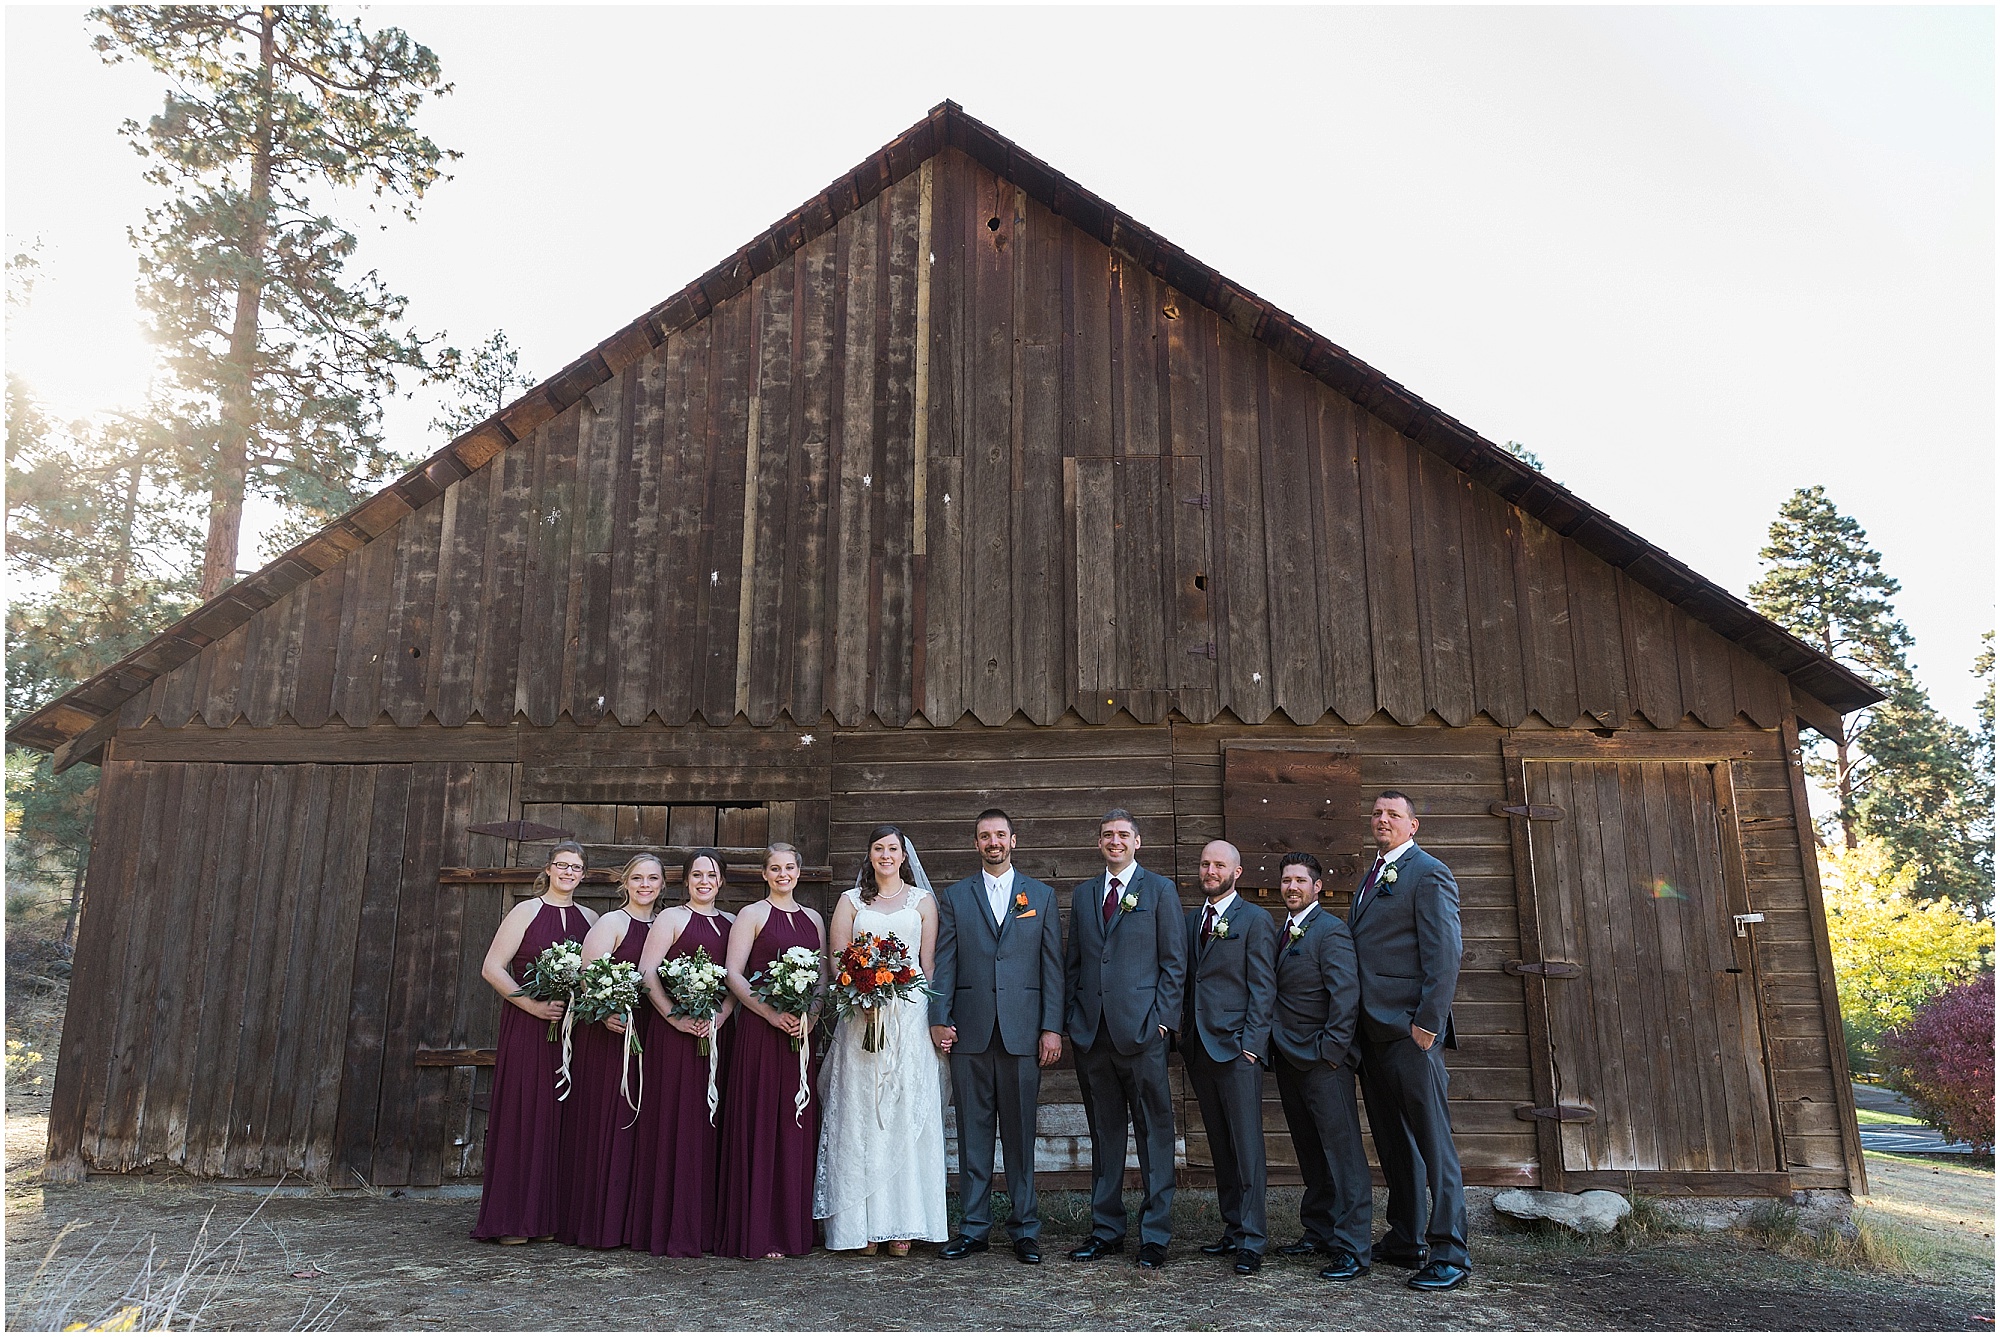 Wedding party portraits at the rustic barn in Hollinshead Park in Bend, OR. | Erica Swantek Photography